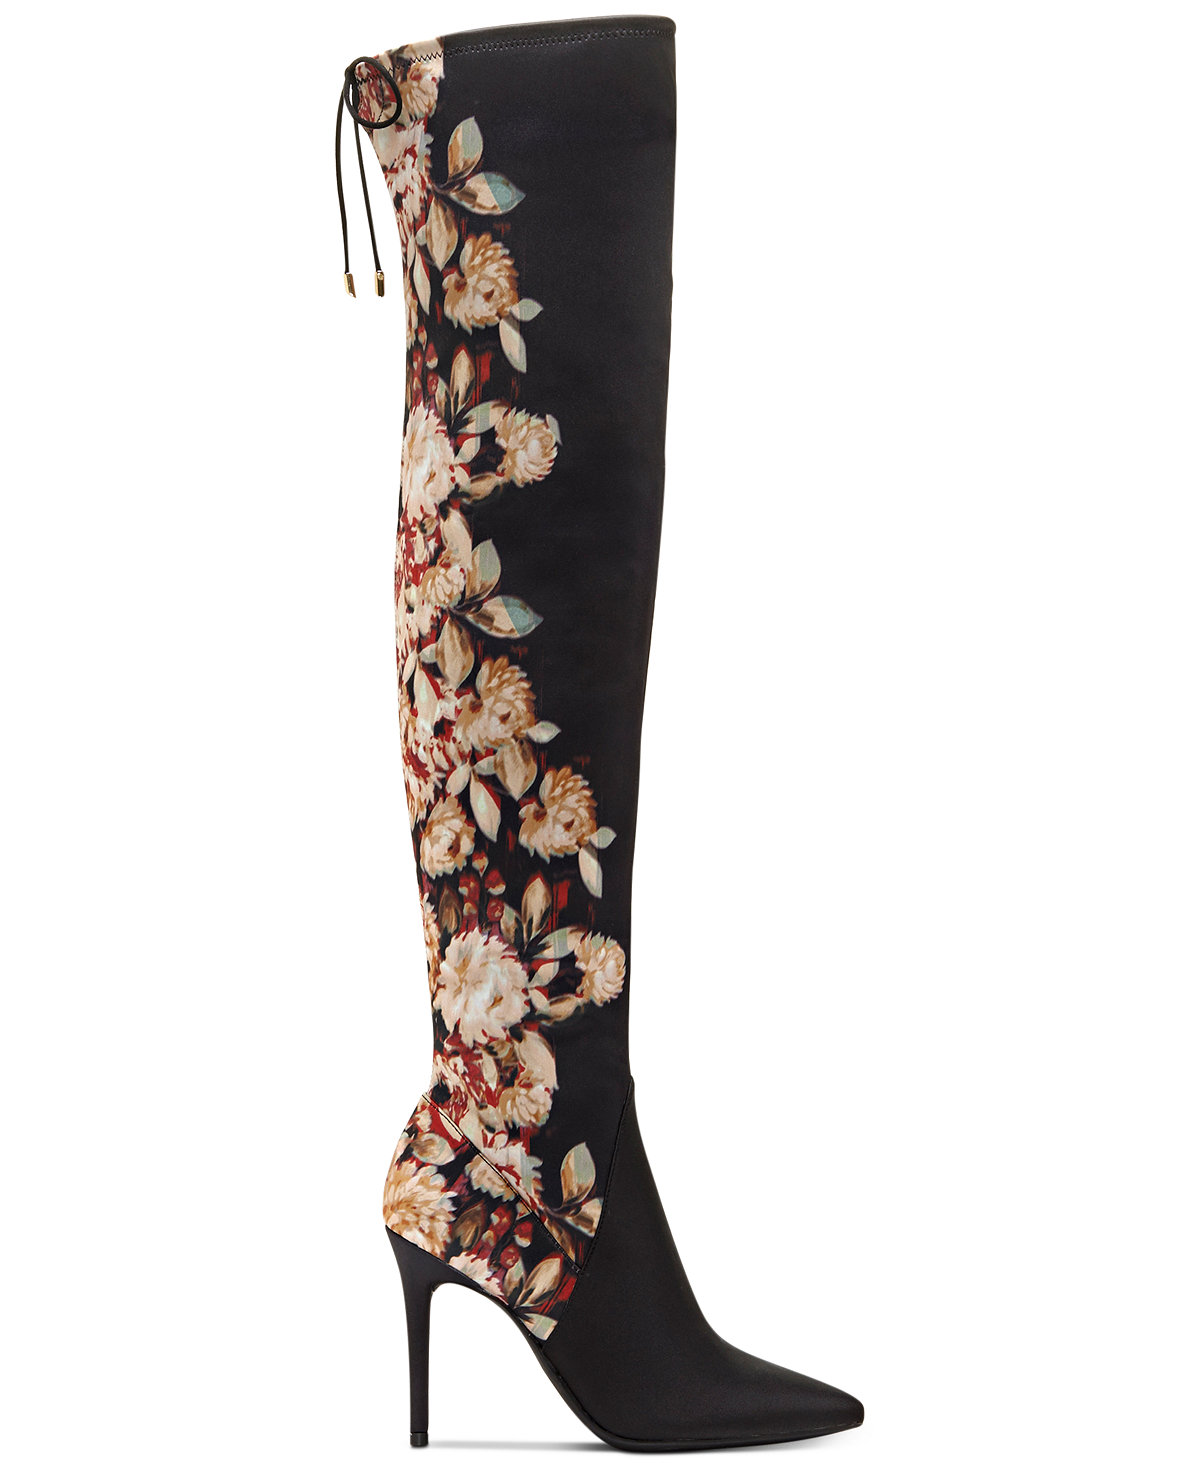 Jessica Simpson floral boots